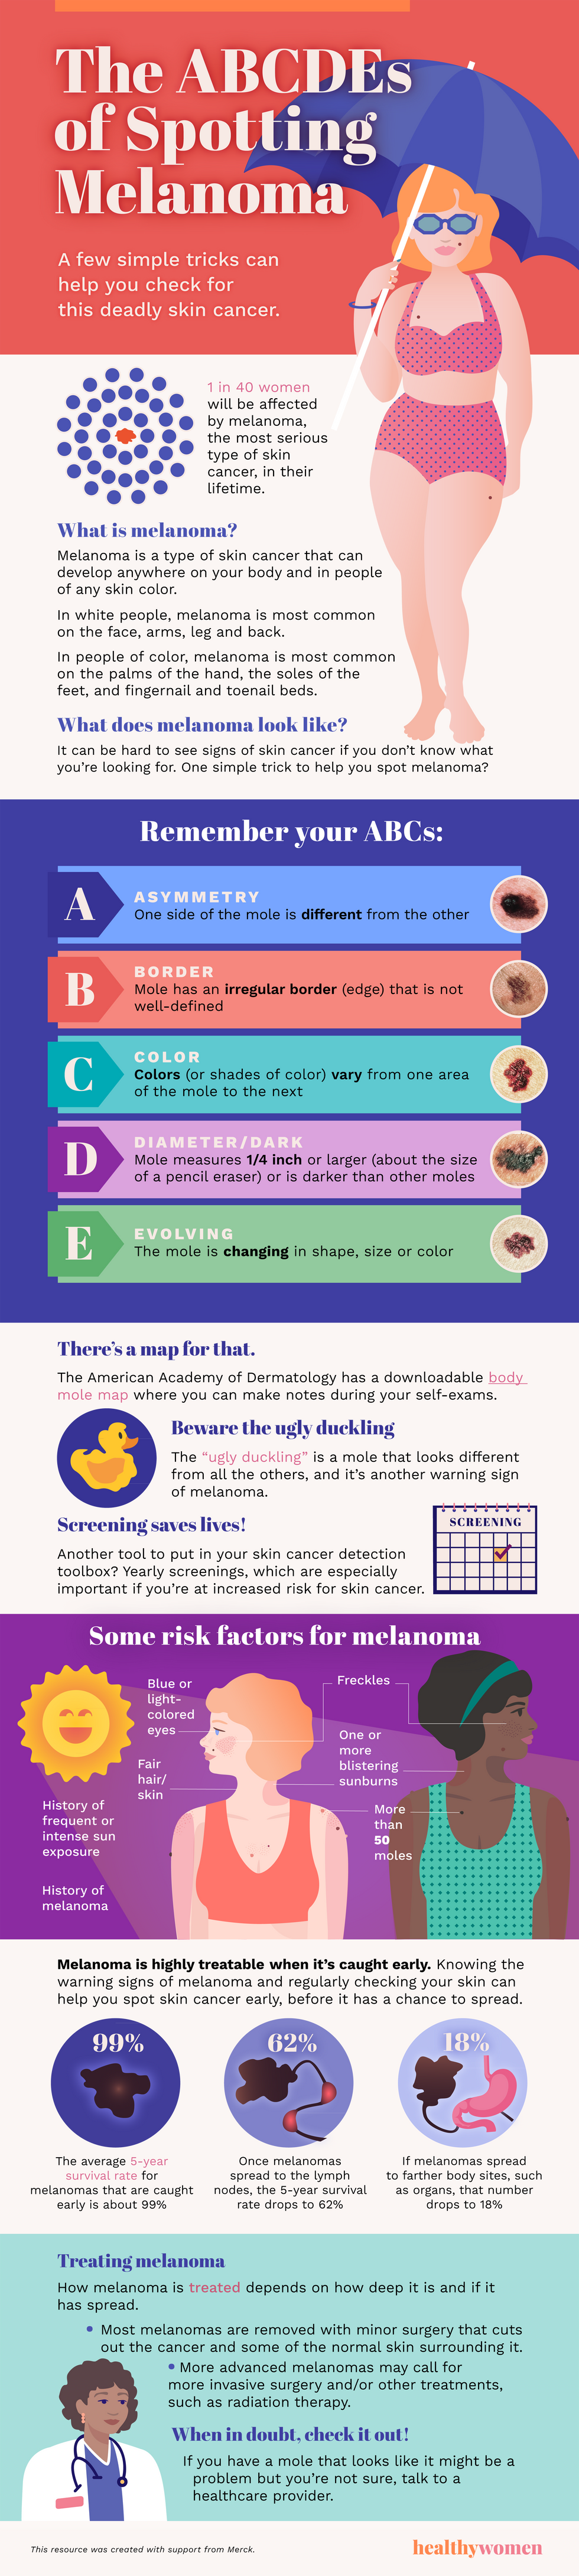 Infographic The ABCDEs of Spotting Melanoma. Click the image to open the PDF